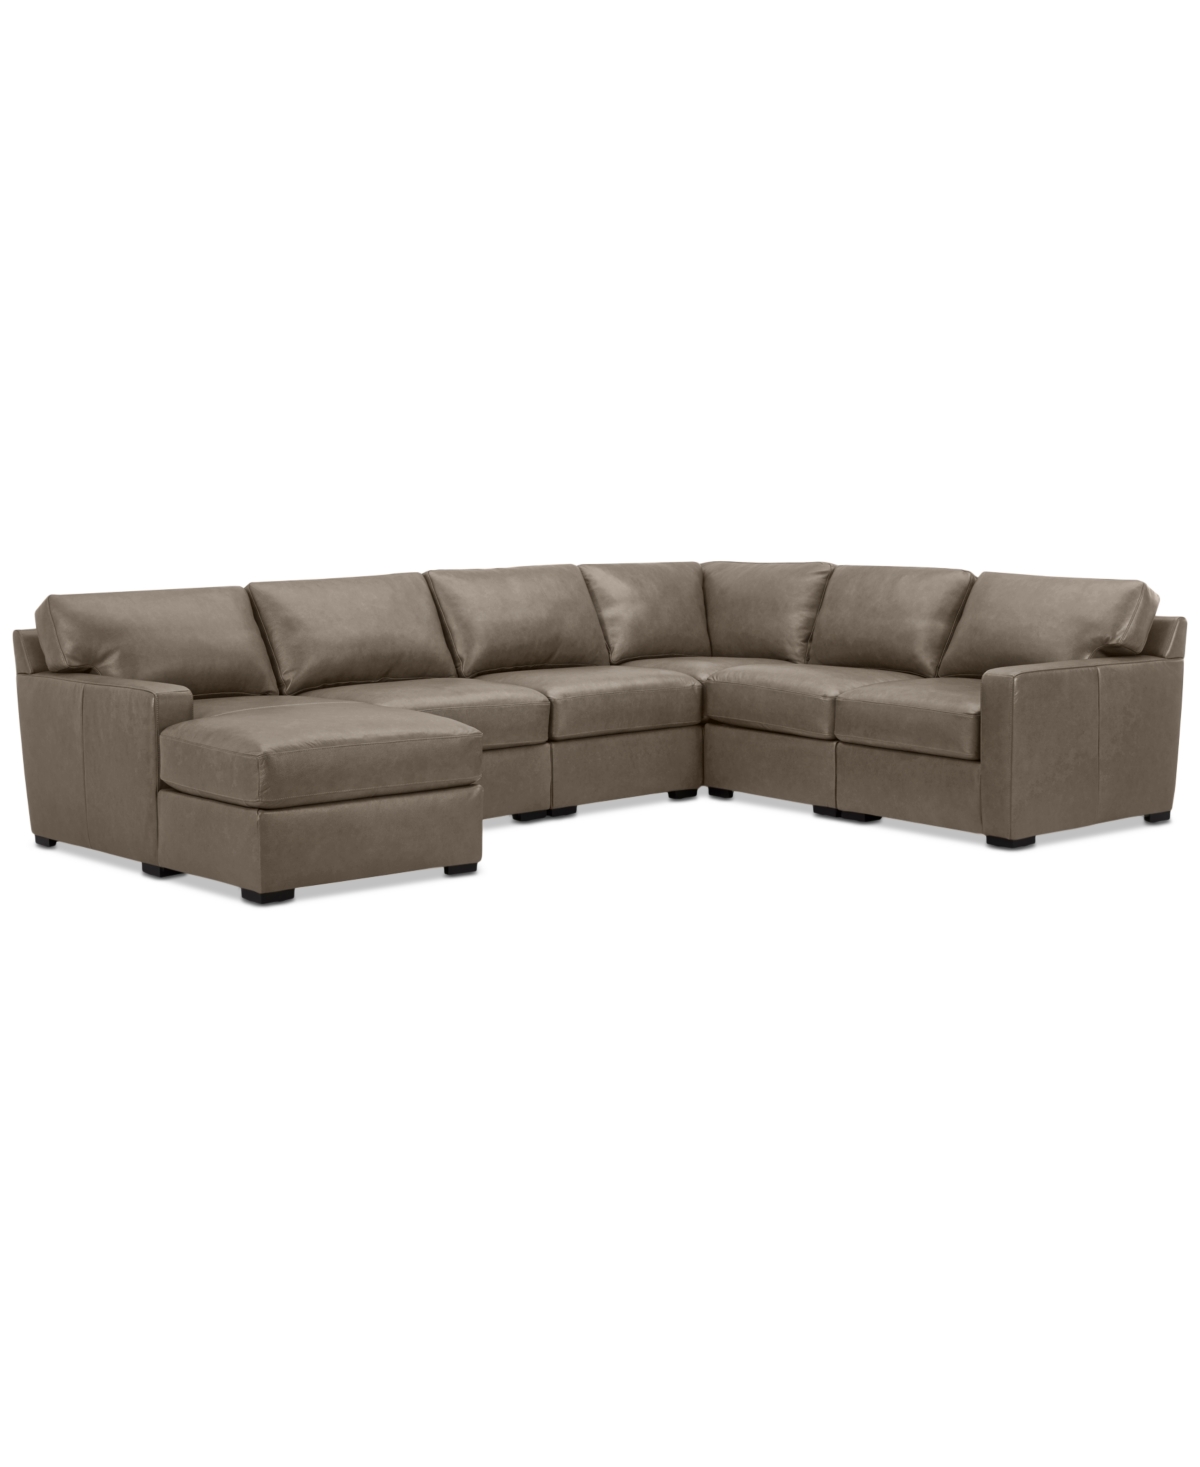 Macy's Radley 129" 6-pc. Leather Square Corner Modular Chaise Sectional, Created For  In Medium Brown